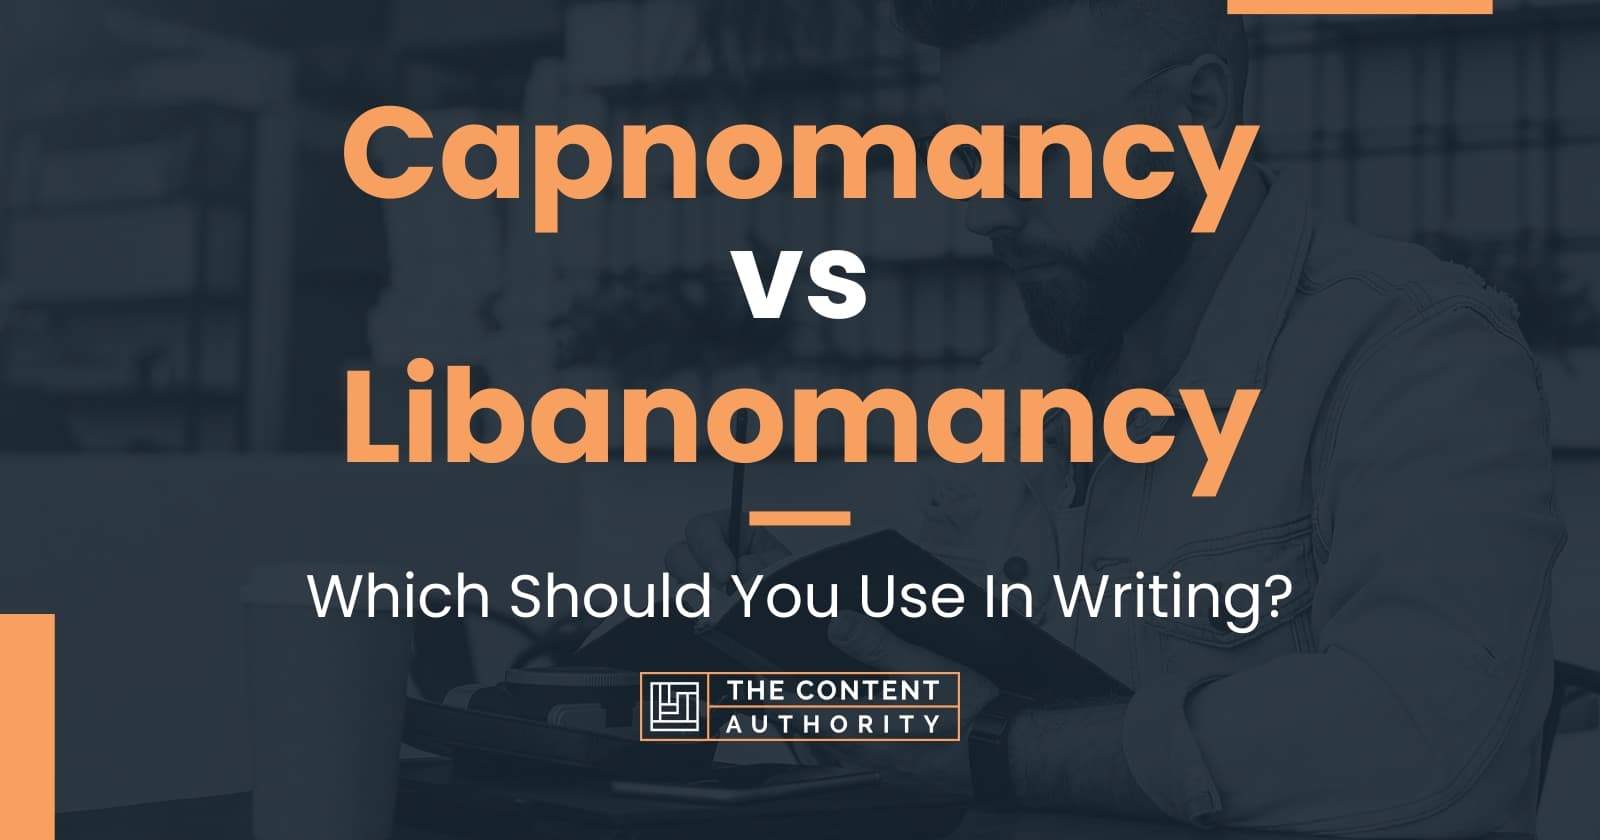 Capnomancy vs Libanomancy Which Should You Use In Writing?